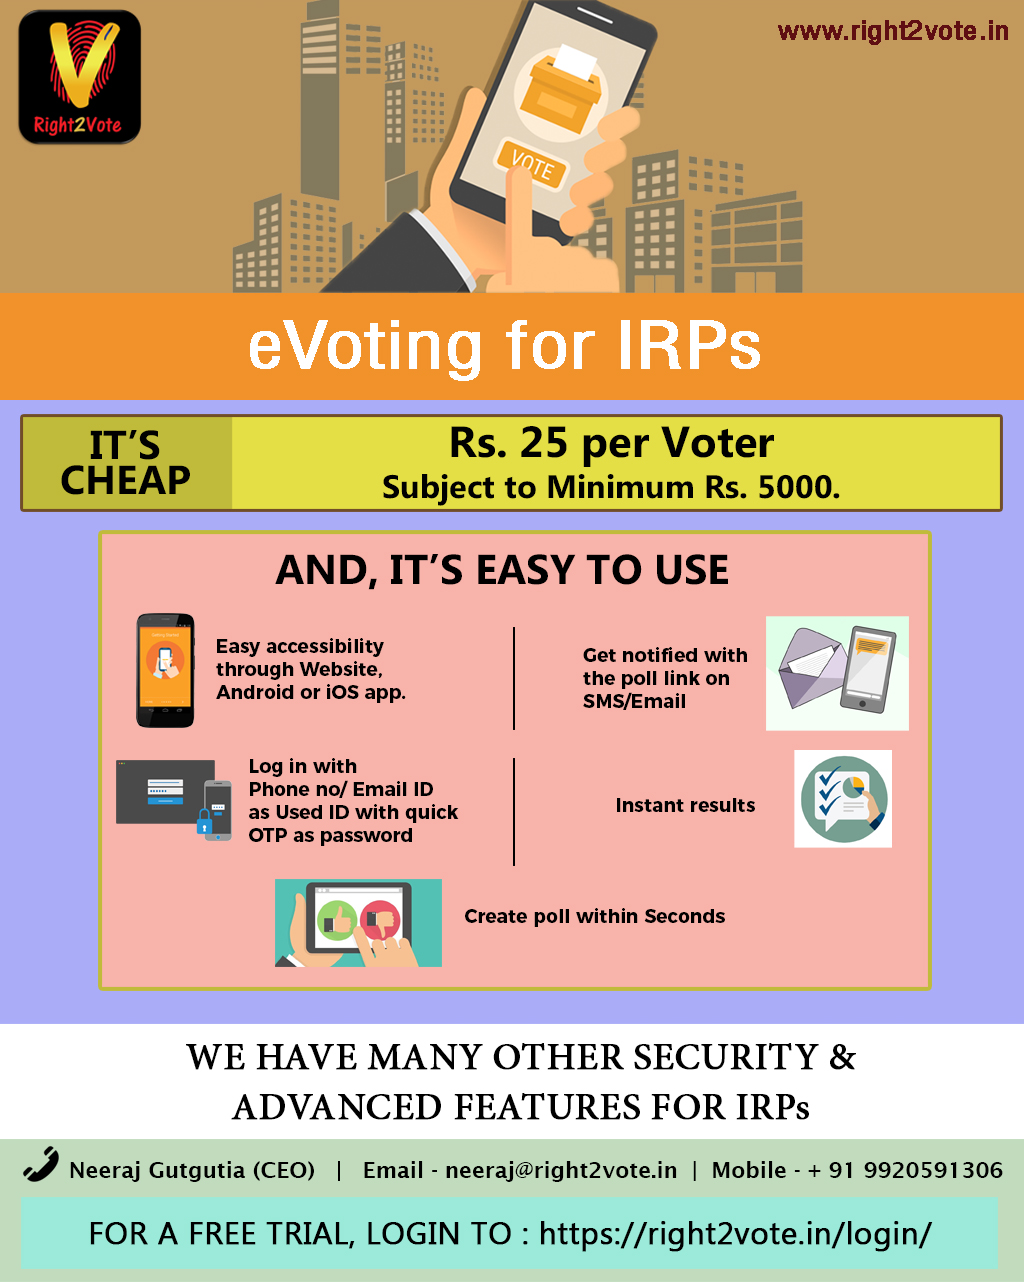 eVoting for IRPs - Right2Vote